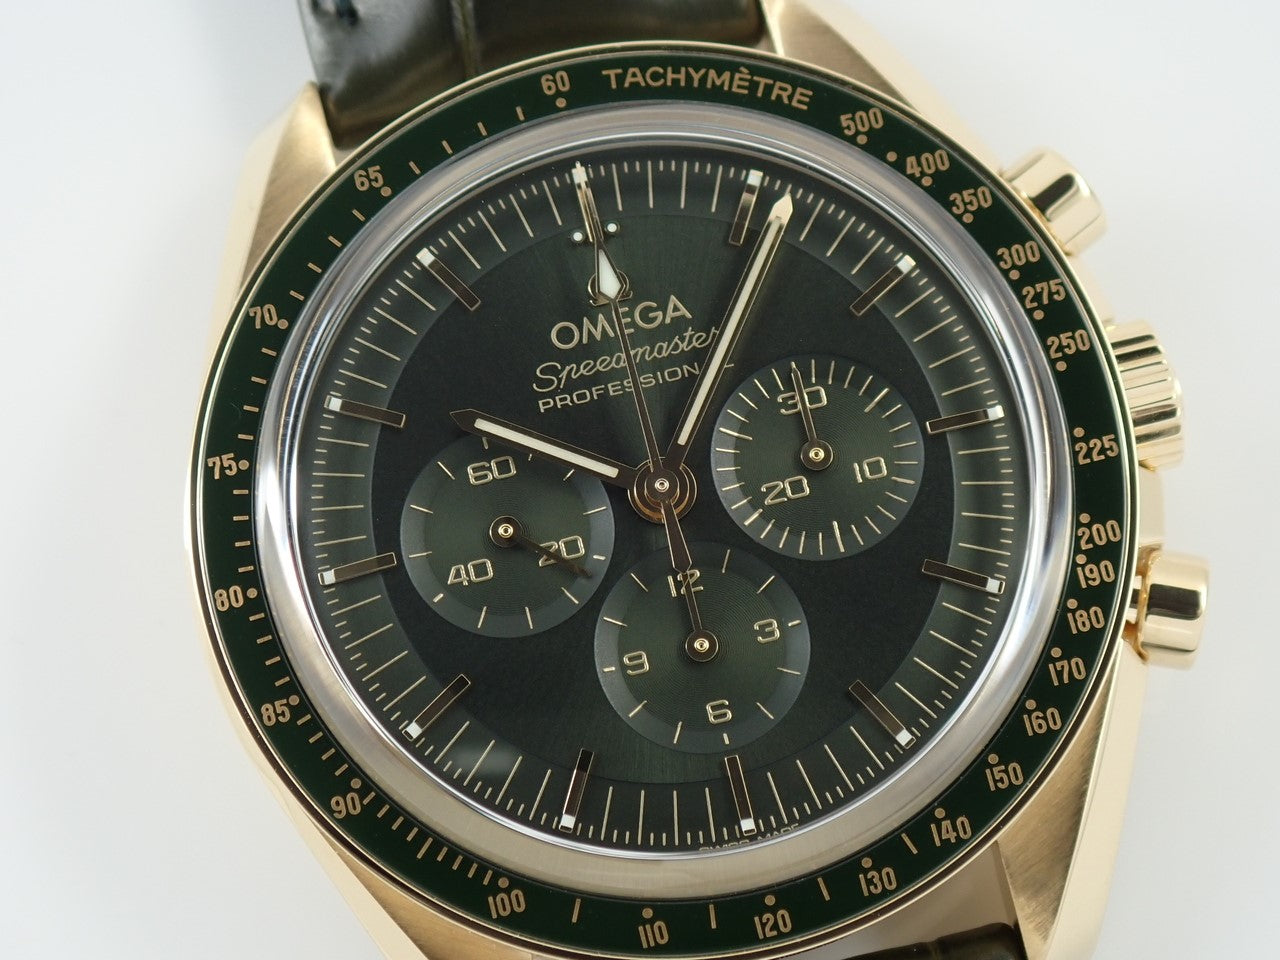 OMEGA Speedmaster Moonwatch Professional Co-Axial Master Chronometer Chronograph 42MM Ref.310.63.42.50.10.001 MOONSHINE™ GOLD Green Dial